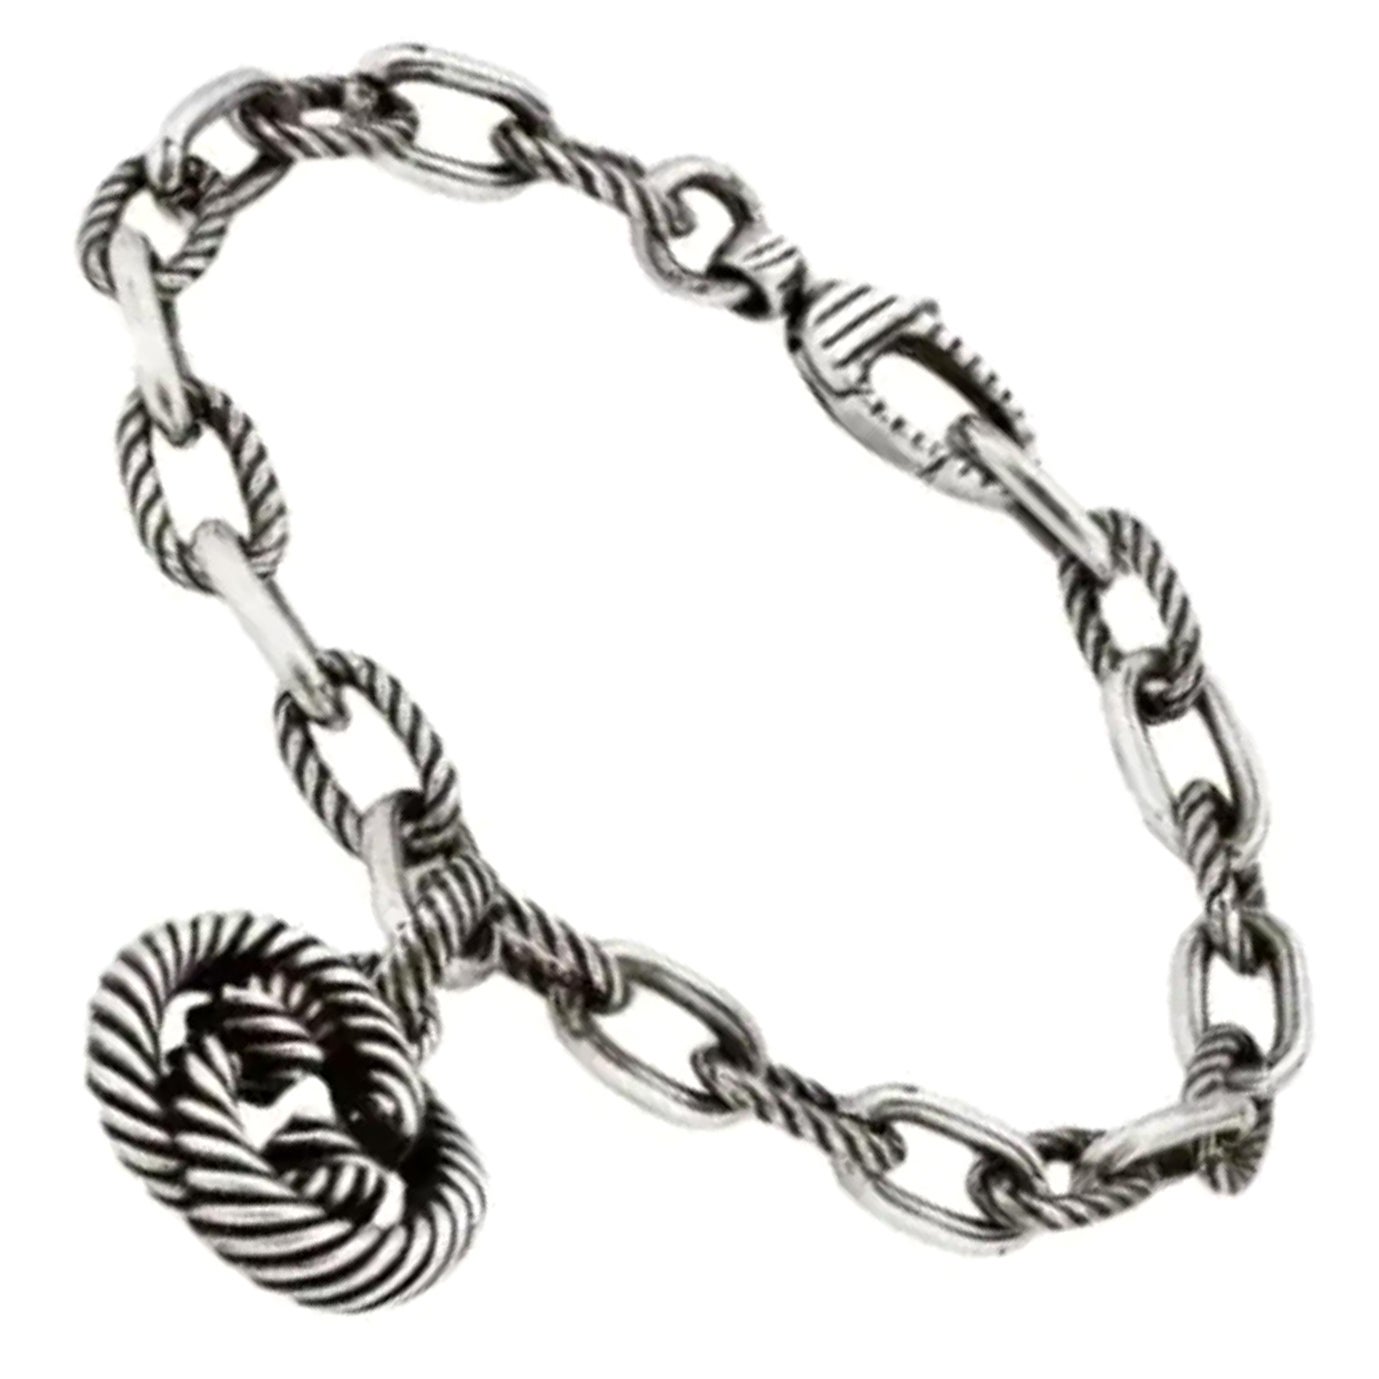 Gucci Interlocking G Twisted Charm Bracelet 925 Sterling Silver 7 Inches For Sale